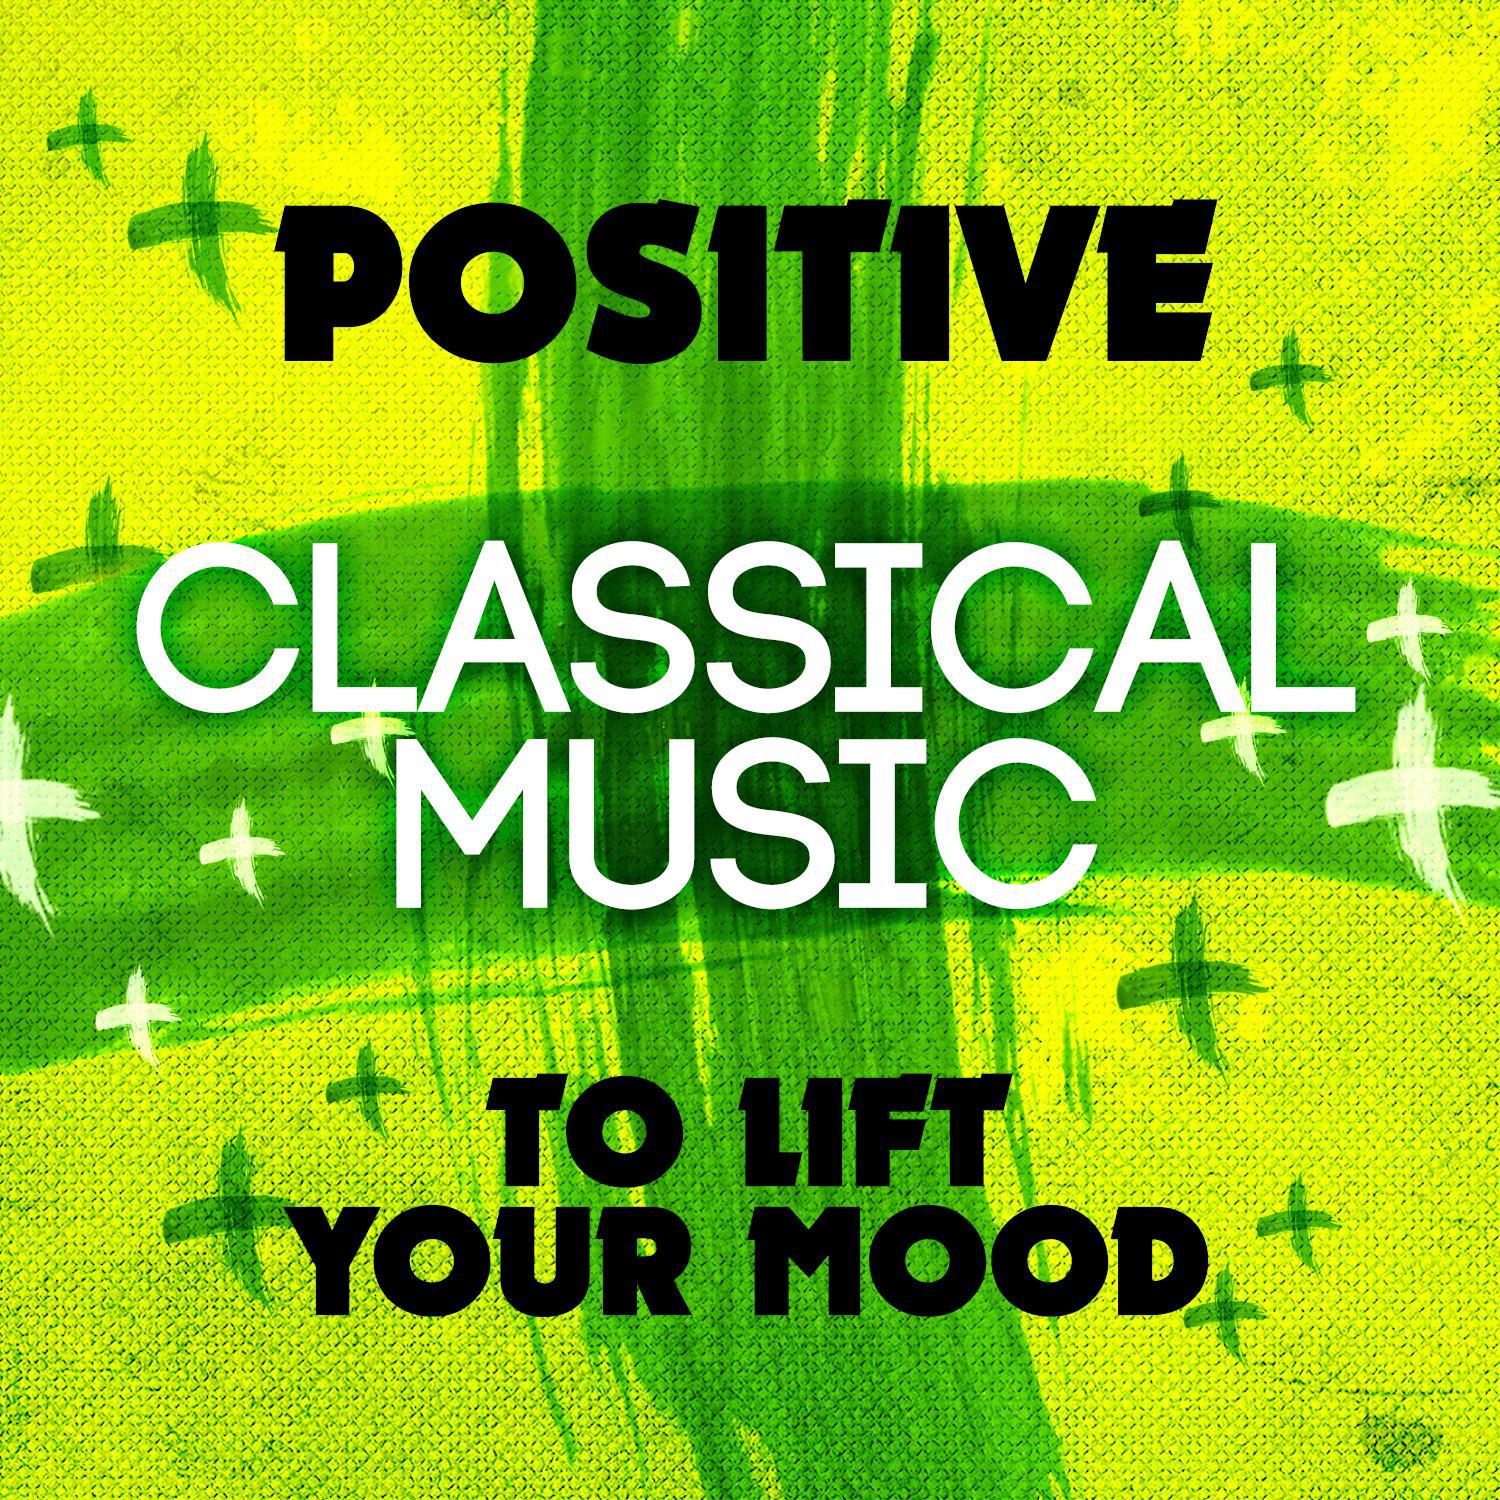 Positive Classical Music to Lift Your Mood